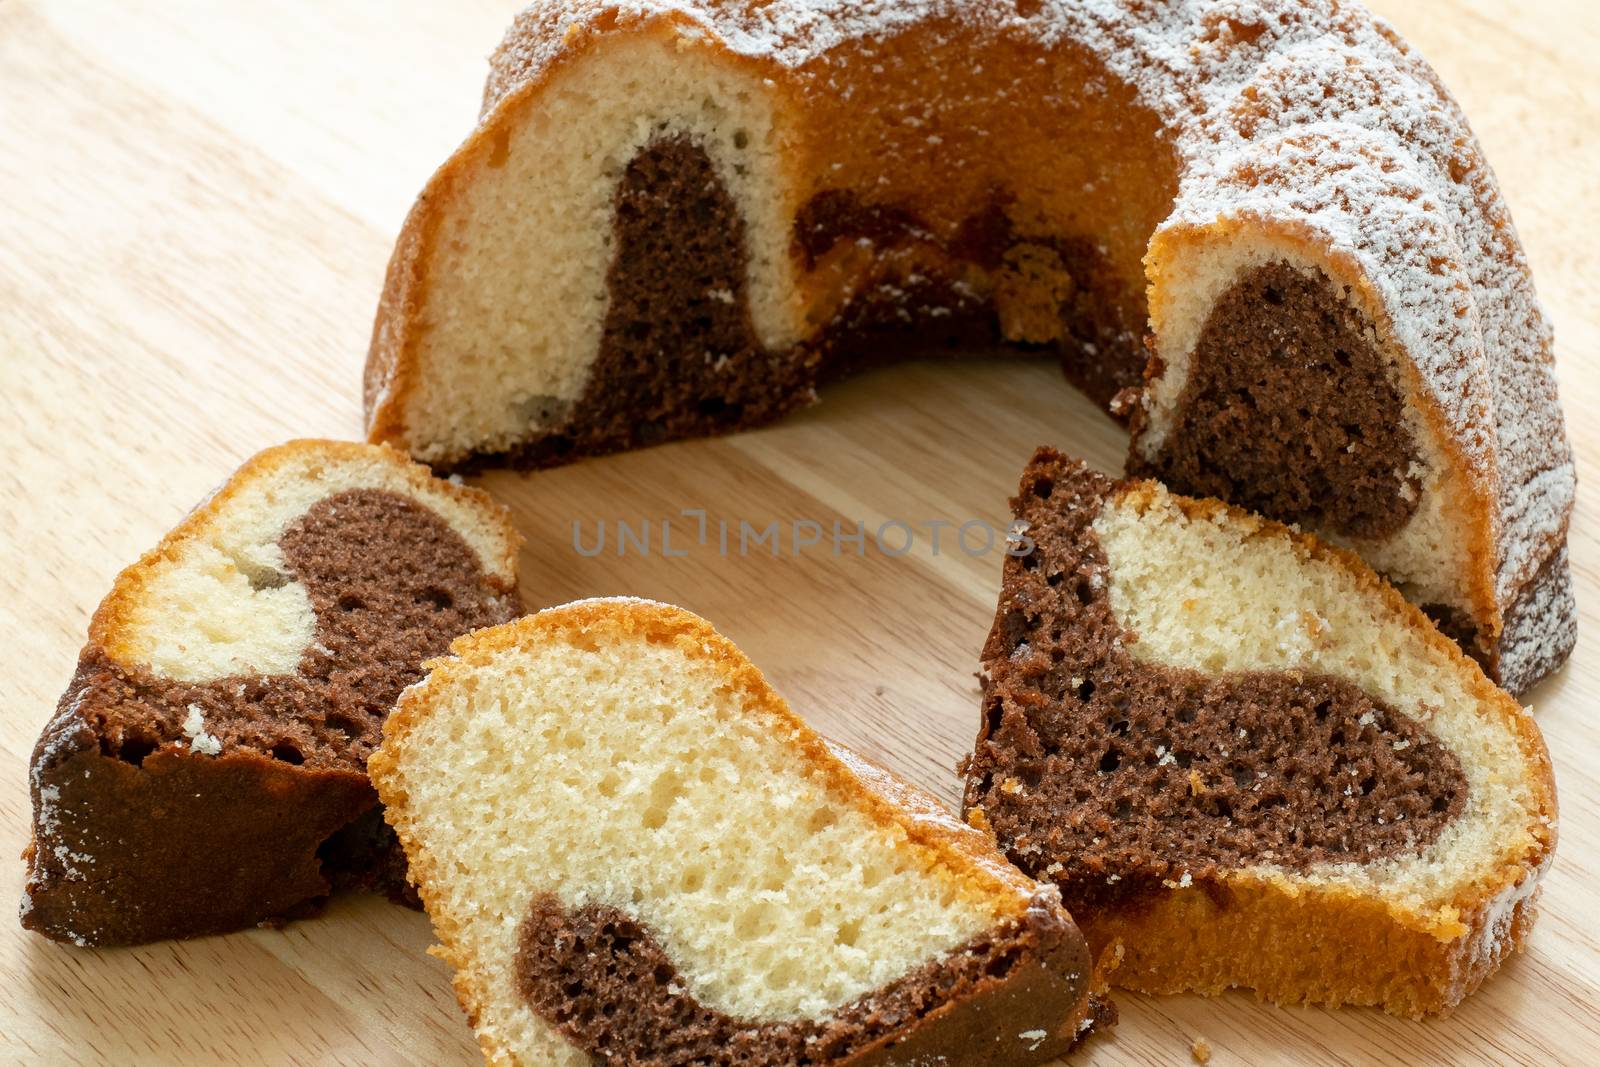 Traditional homemade marble cake. Sliced marble bundt cake on wo by xtrekx